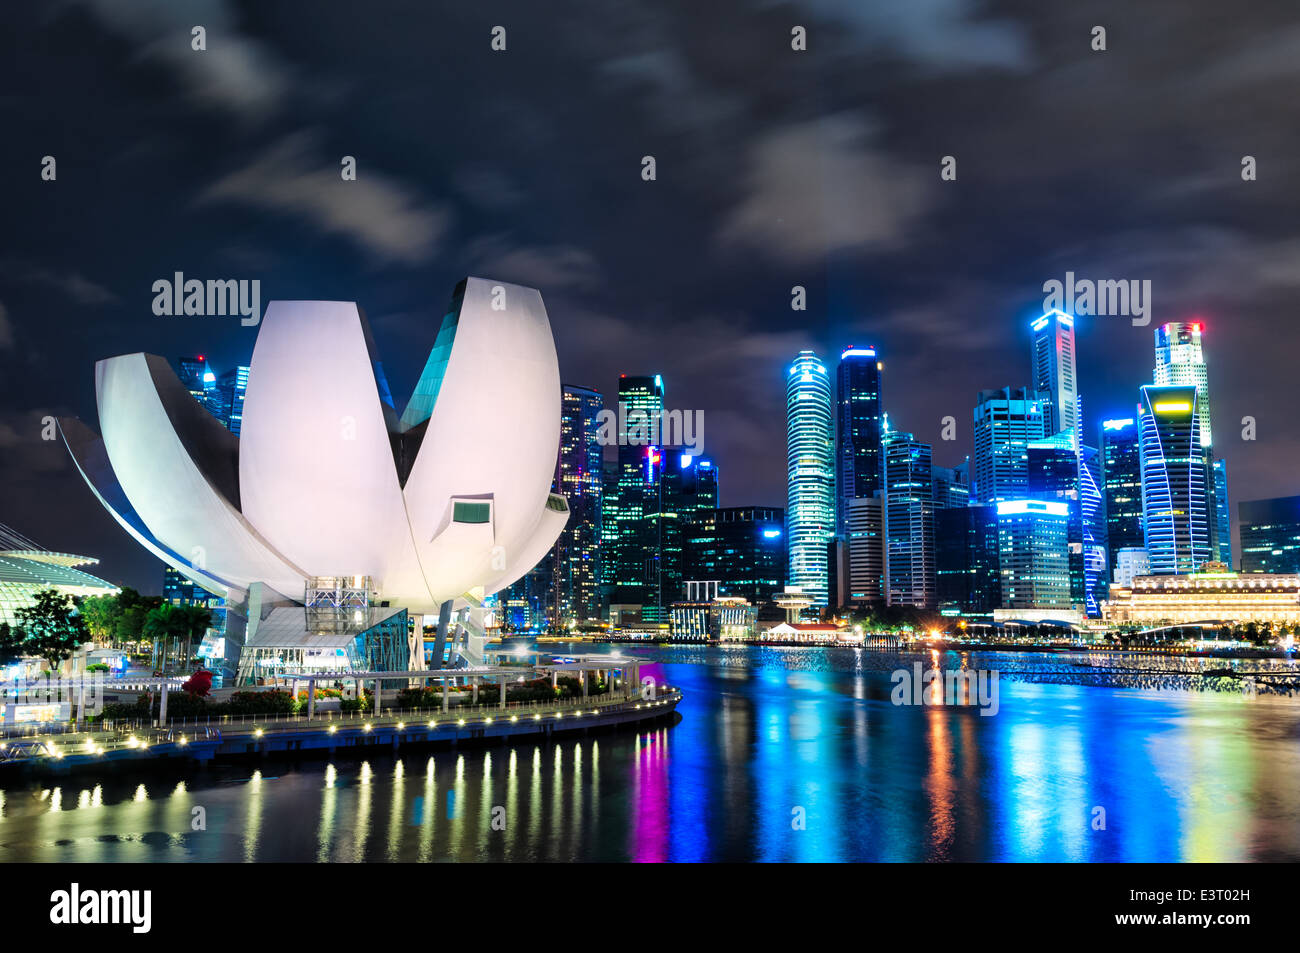 The Singapore skyline at night with the ArtScience museum in the foreground. Stock Photo